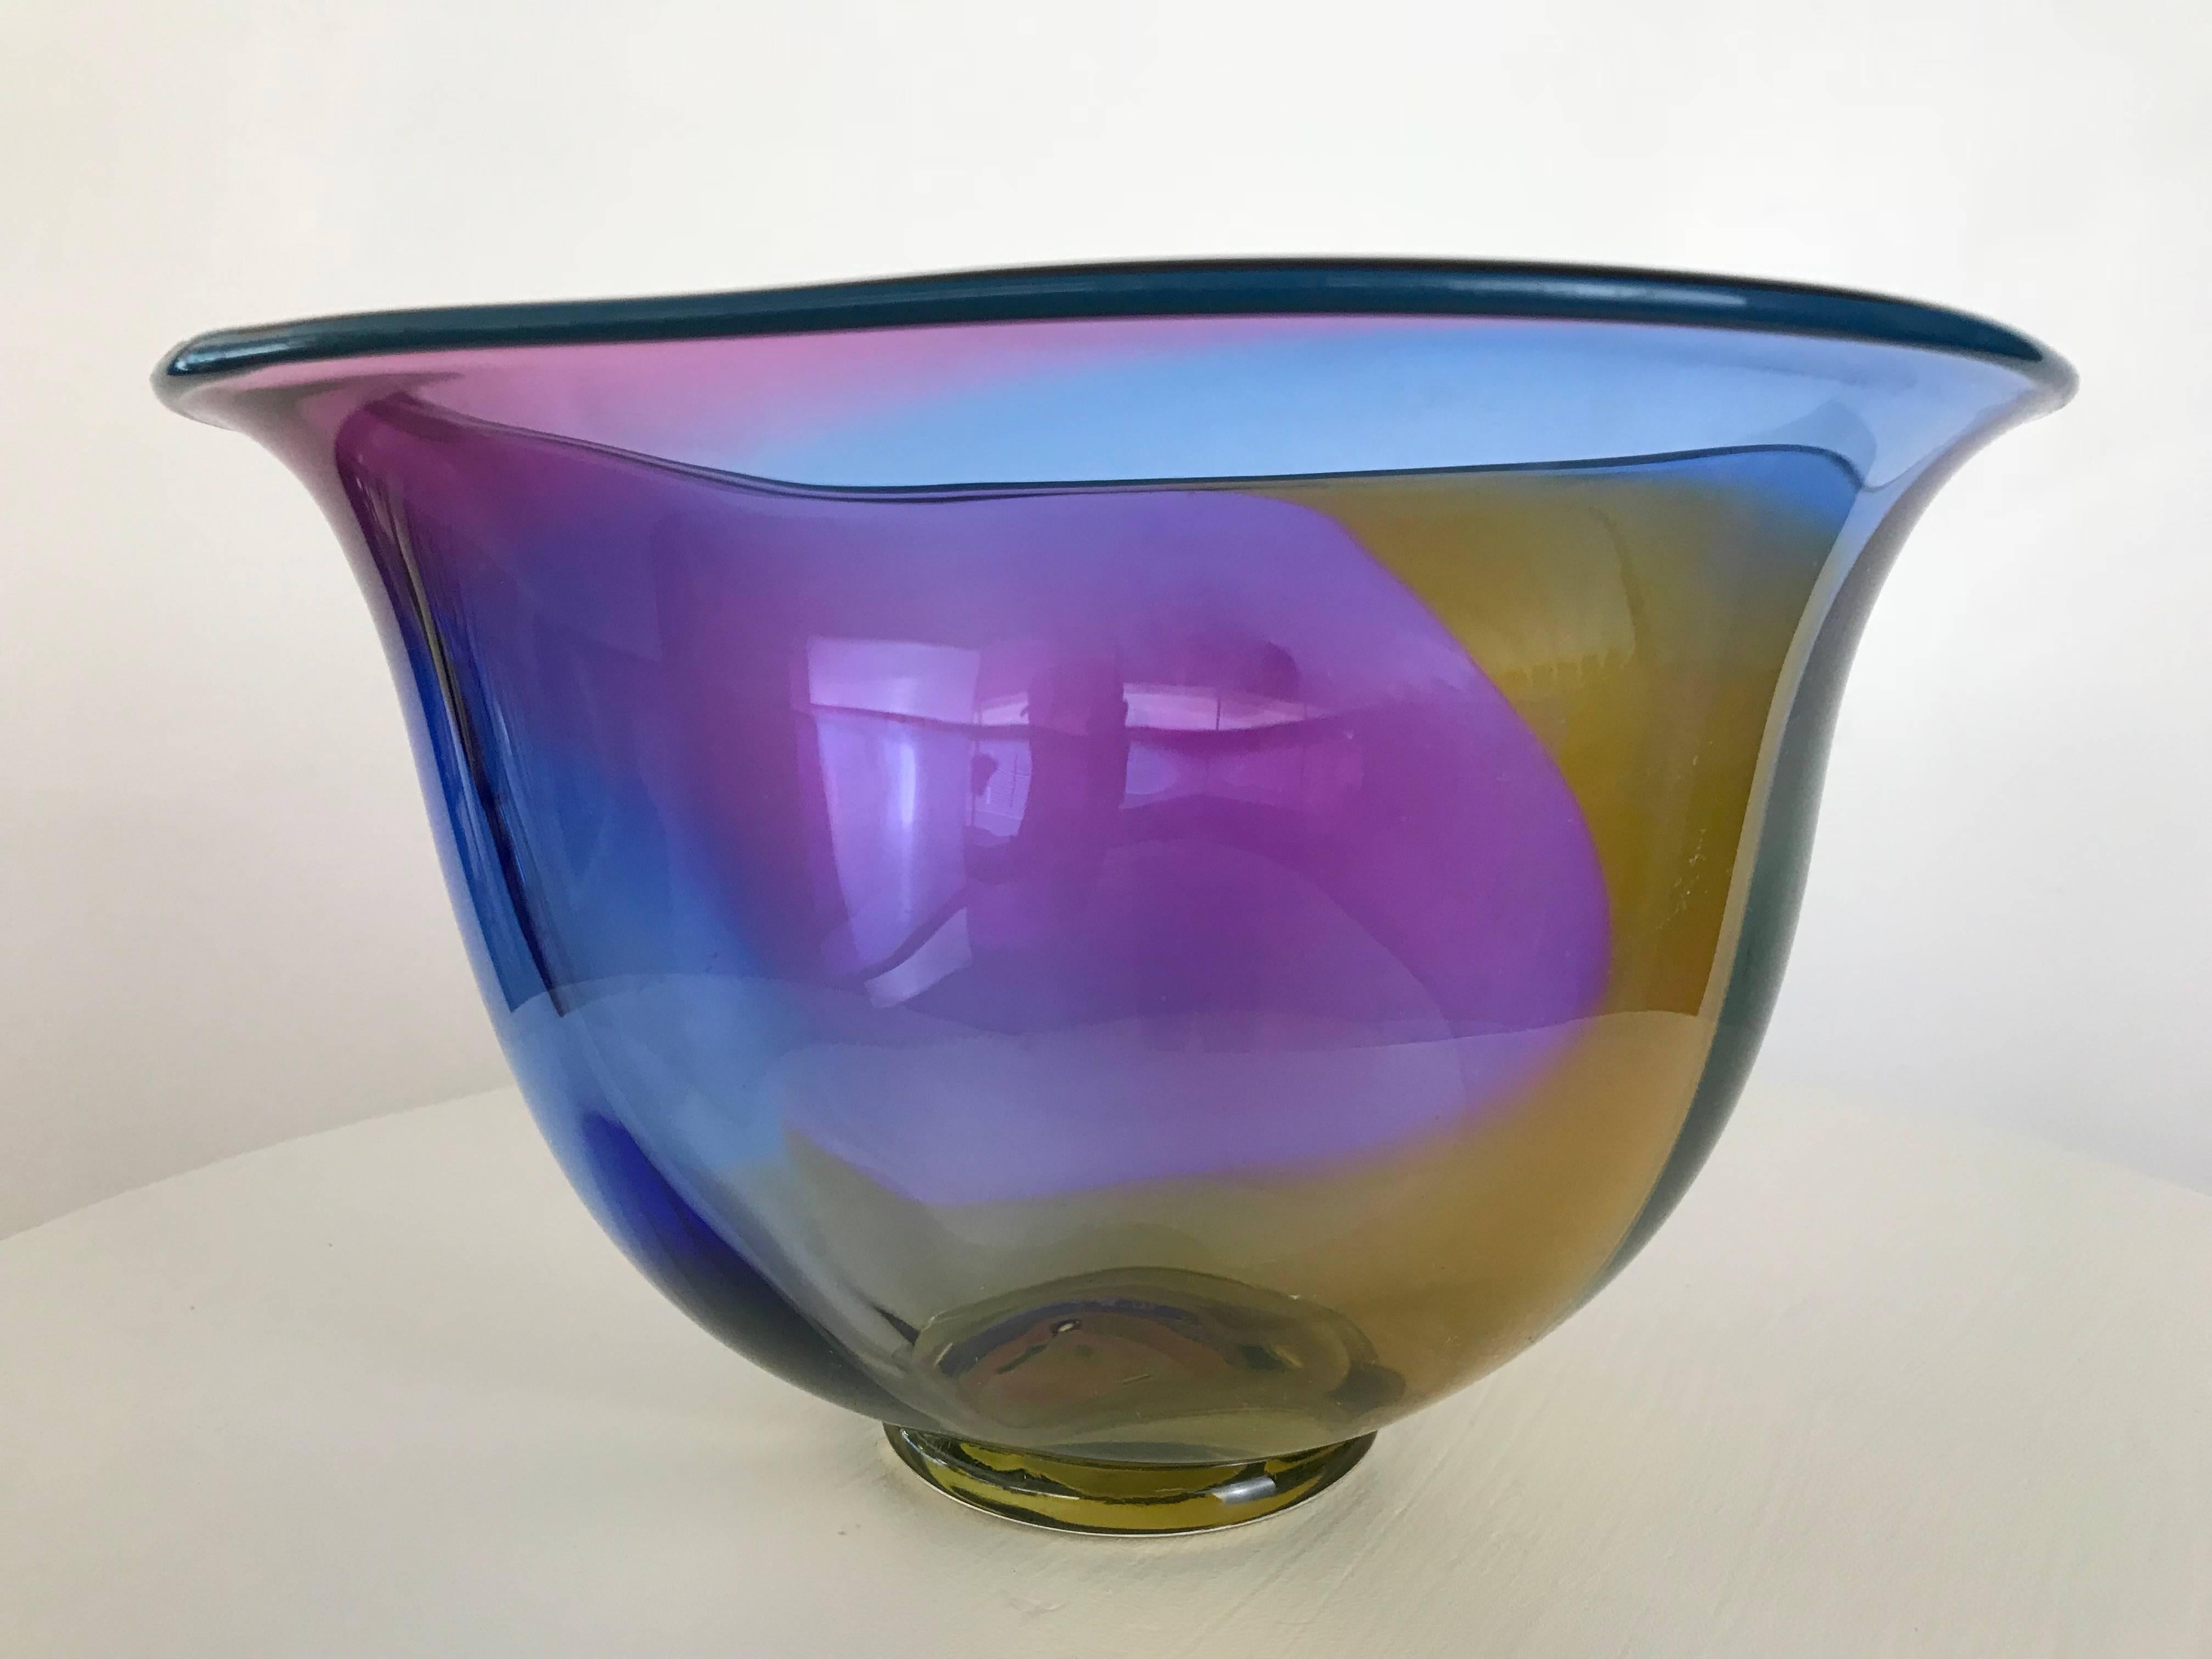 Swedish modern handblown art glass bowl, executed by Jan Erik Ritzman and Sven-A°ke Carlsson at their renowned workshop Transjo¨ Hytta. The piece is in an excellent condition and signed on the bottom: 